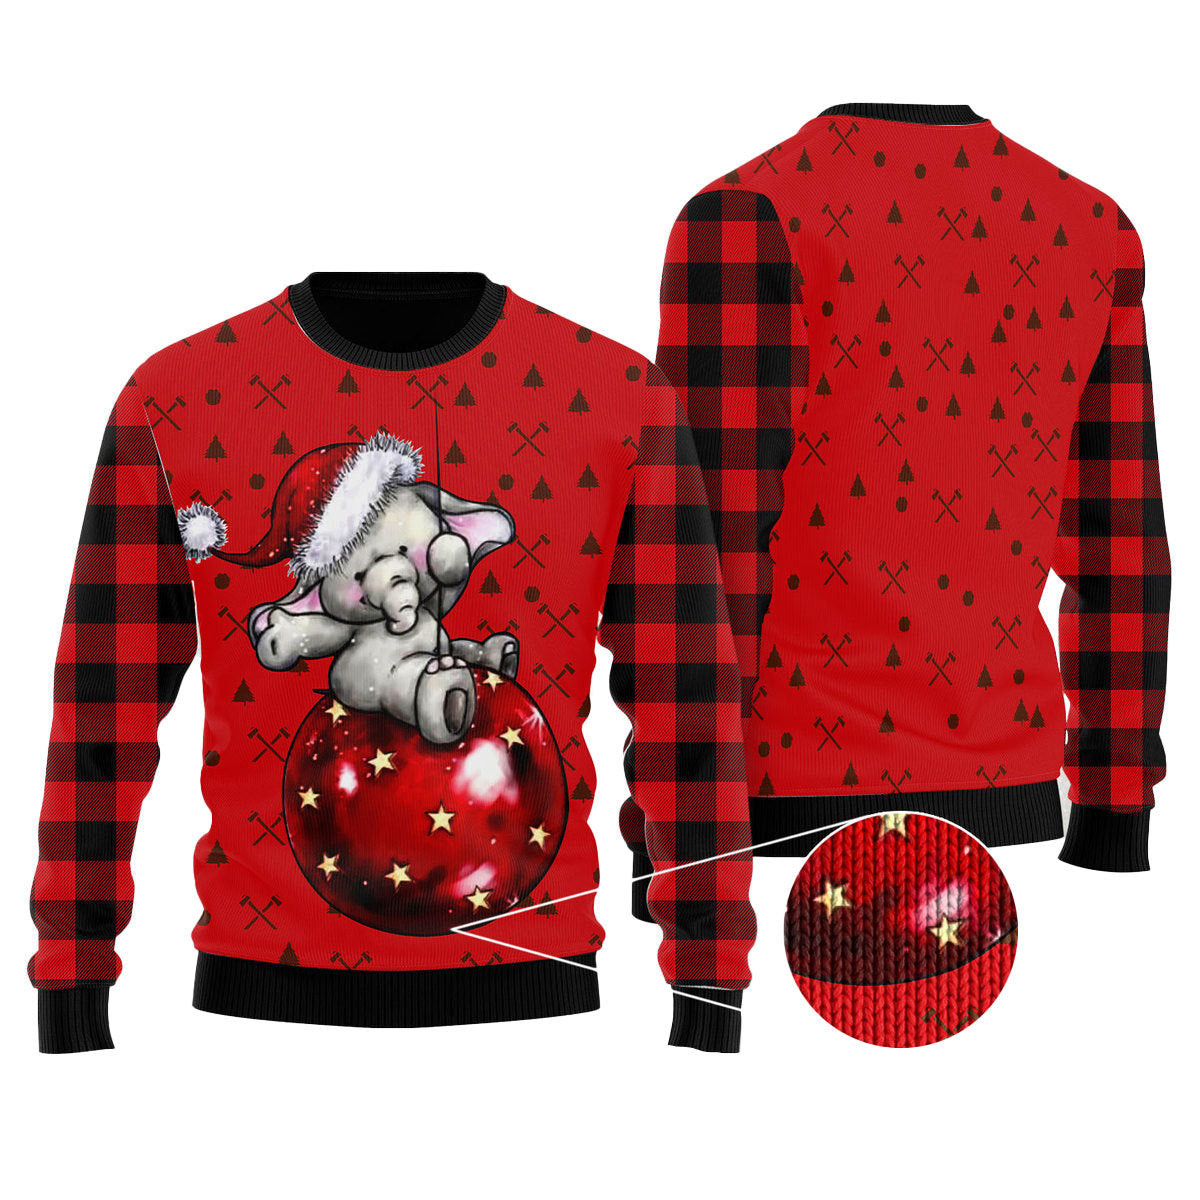 Elephant Cute Red Pattern Ugly Christmas Sweater Ugly Sweater For Men Women, Holiday Sweater